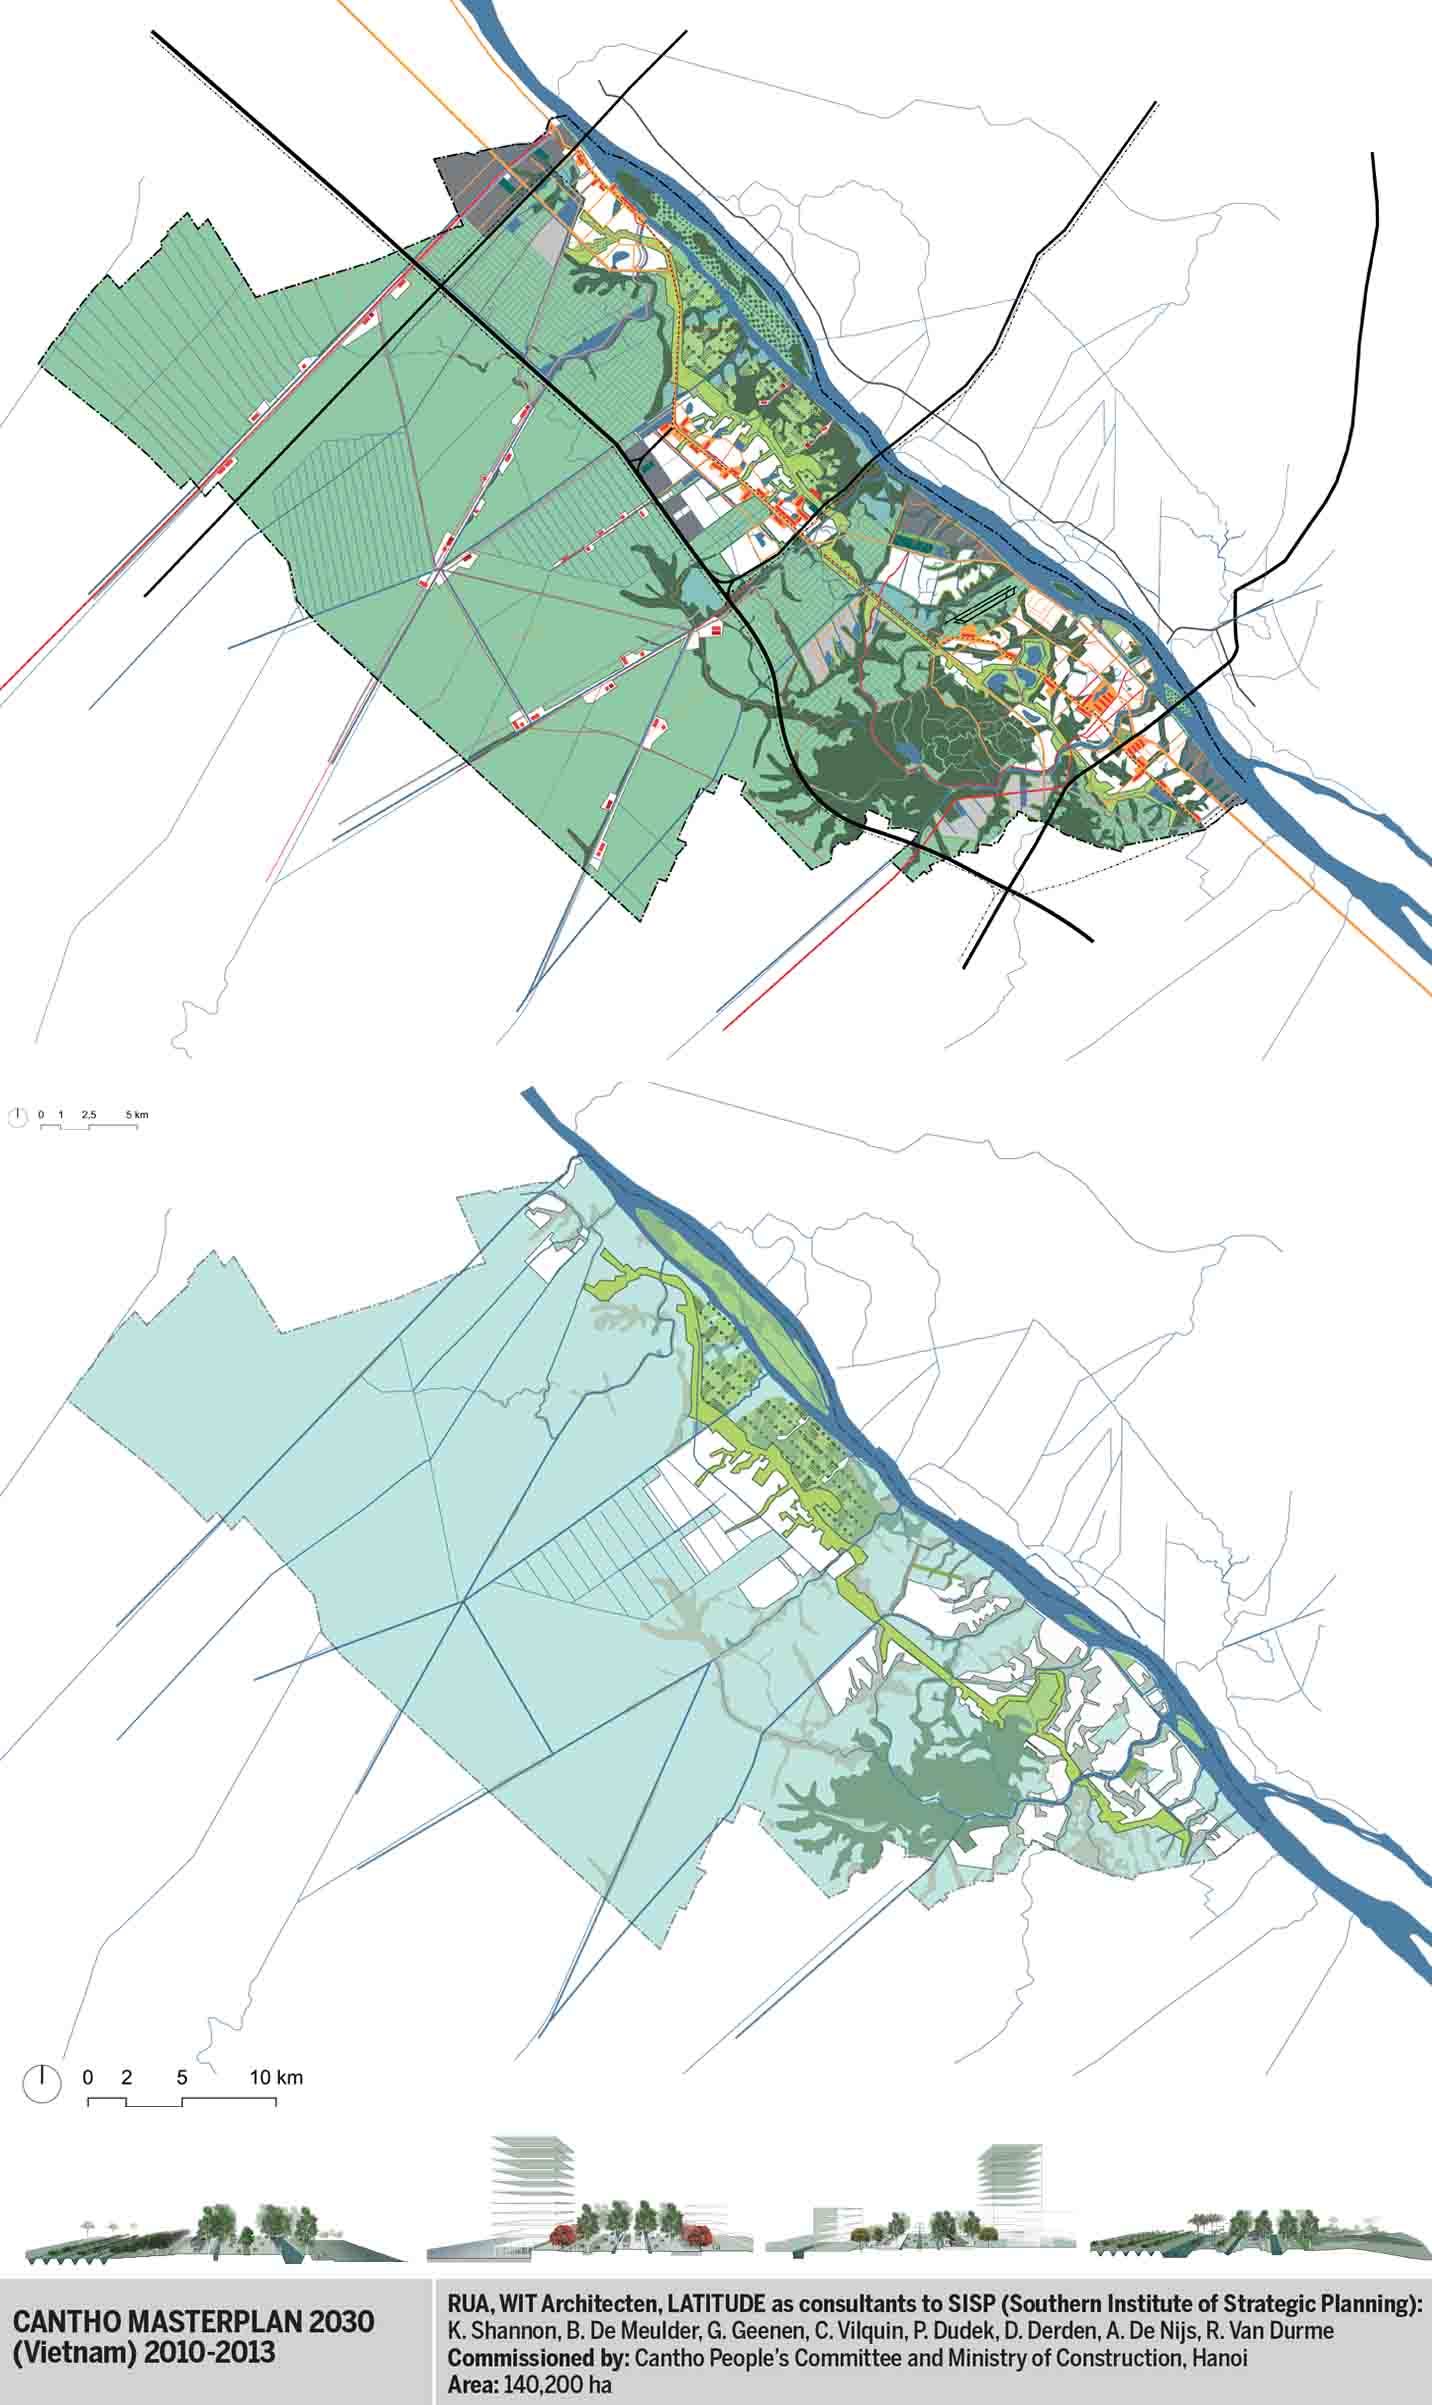 rua-projects-water-and-forest-urbanism-cantho-masterplan-2030-vietnam-2010-2013-wit-architecten-latitude-consultants-sisp-southern-institute-strategic-planning-kshannon-bdemeulder-ggeenen-cvilquin-pdudek-dderden-ade-nijs-rvan-durme-commissioned-cantho-people-committee-ministry-construction-hanoi-area-140200-ha